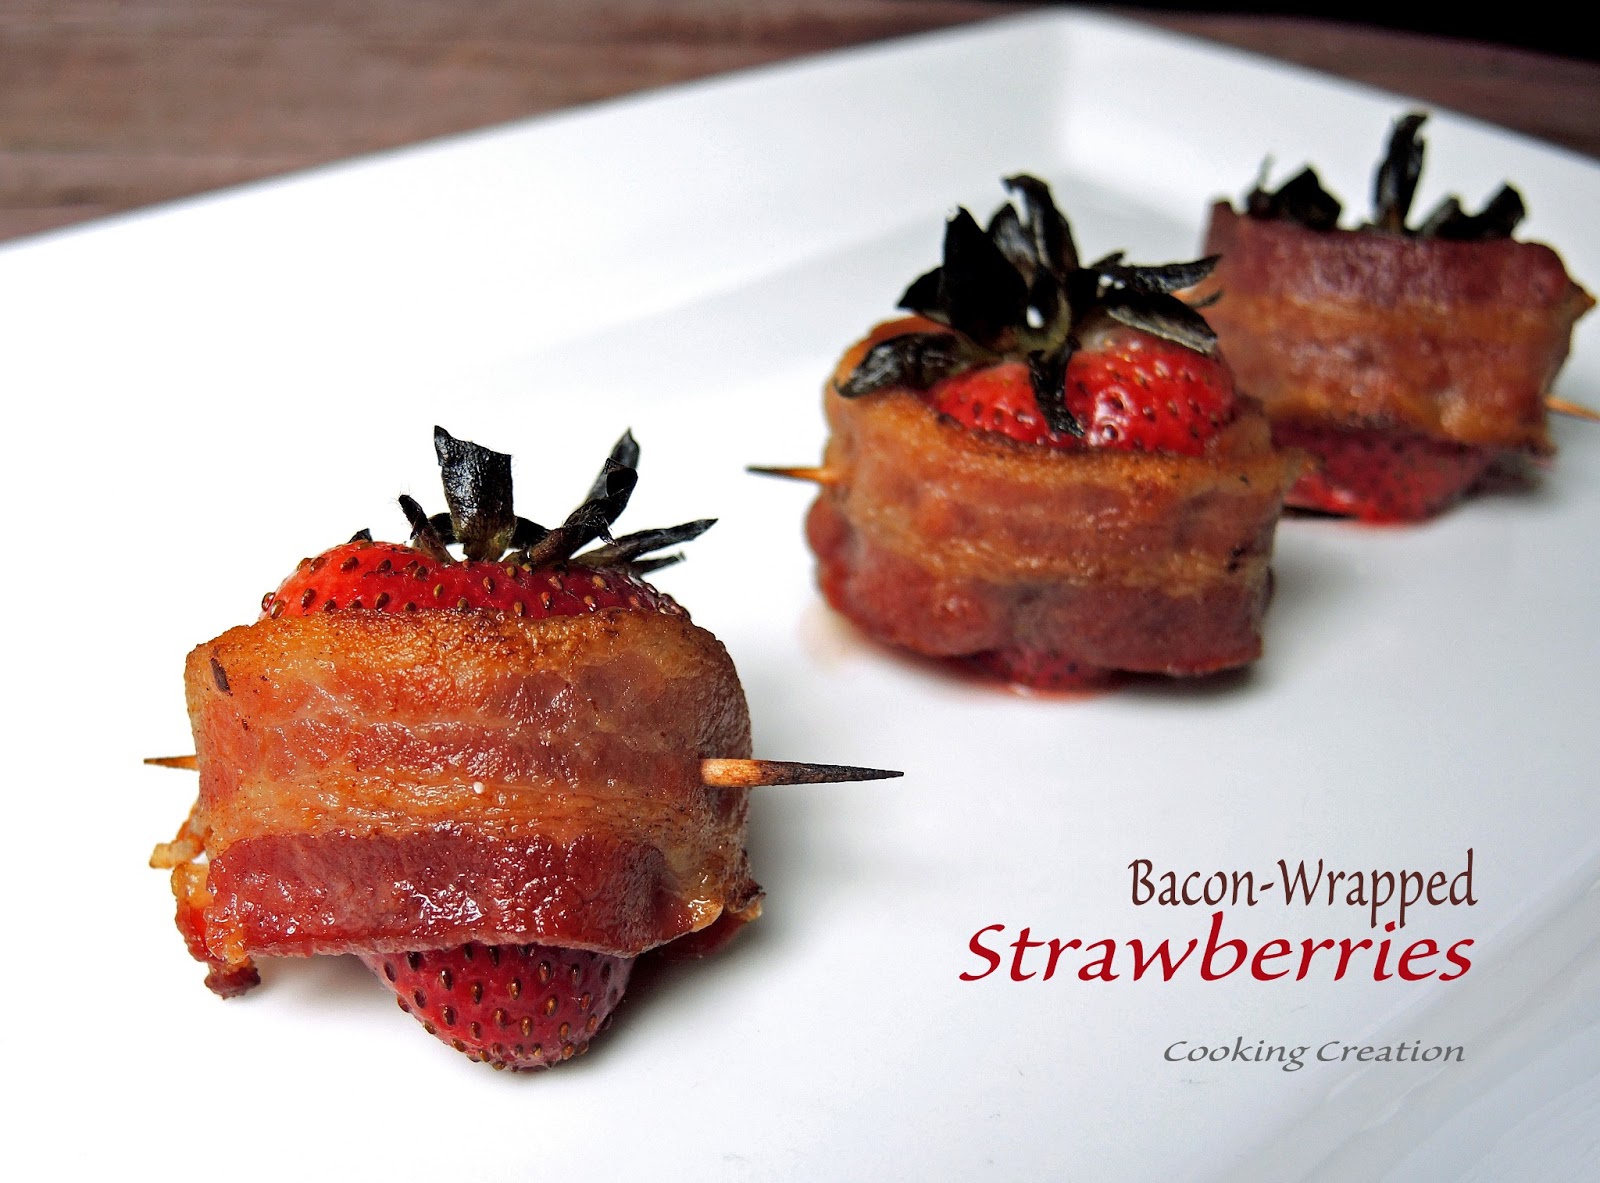 Bacon-wrapped+strawberries4.jpg